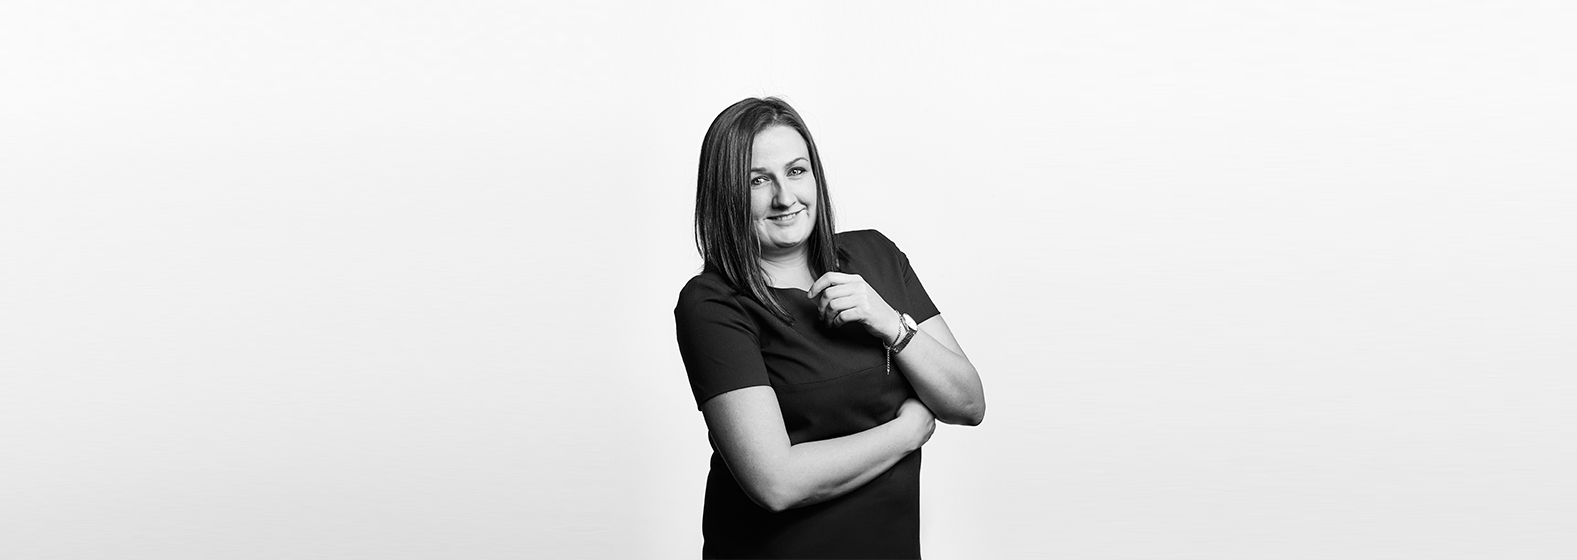 A grayscale photo of Danielle Carter, Associate Solicitor. She wears a dark short-sleeved blouse and has her arms crossed slightly, she is smiling.